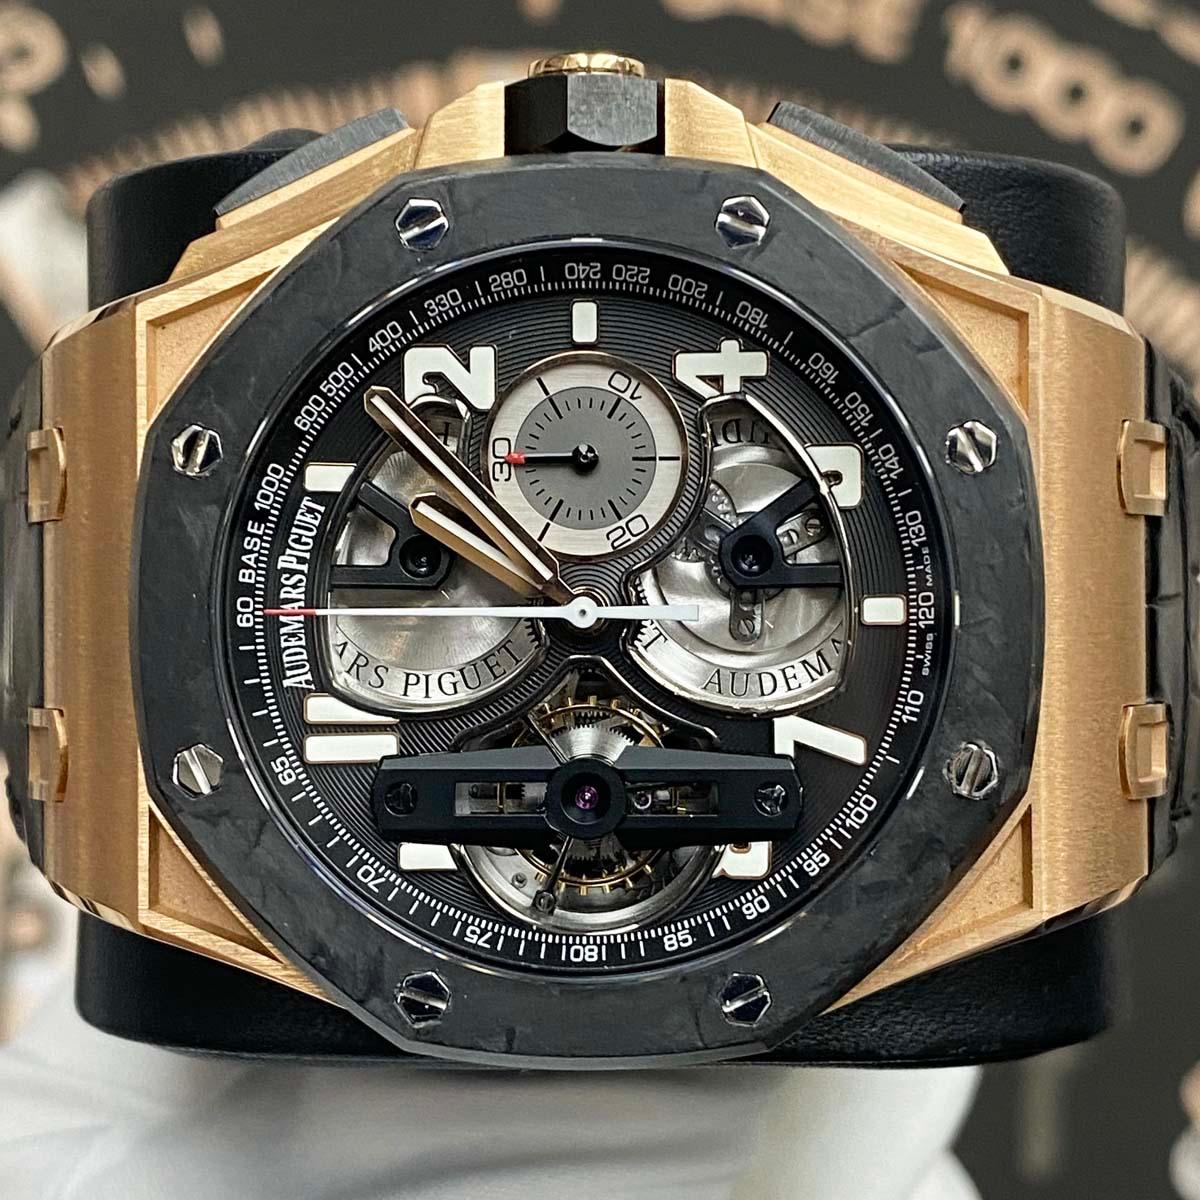 Audemars Piguet Royal Oak Offshore Tourbillon Chronograph 44mm 26288OF Openworked Dial Pre-Owned - Gotham Trading 